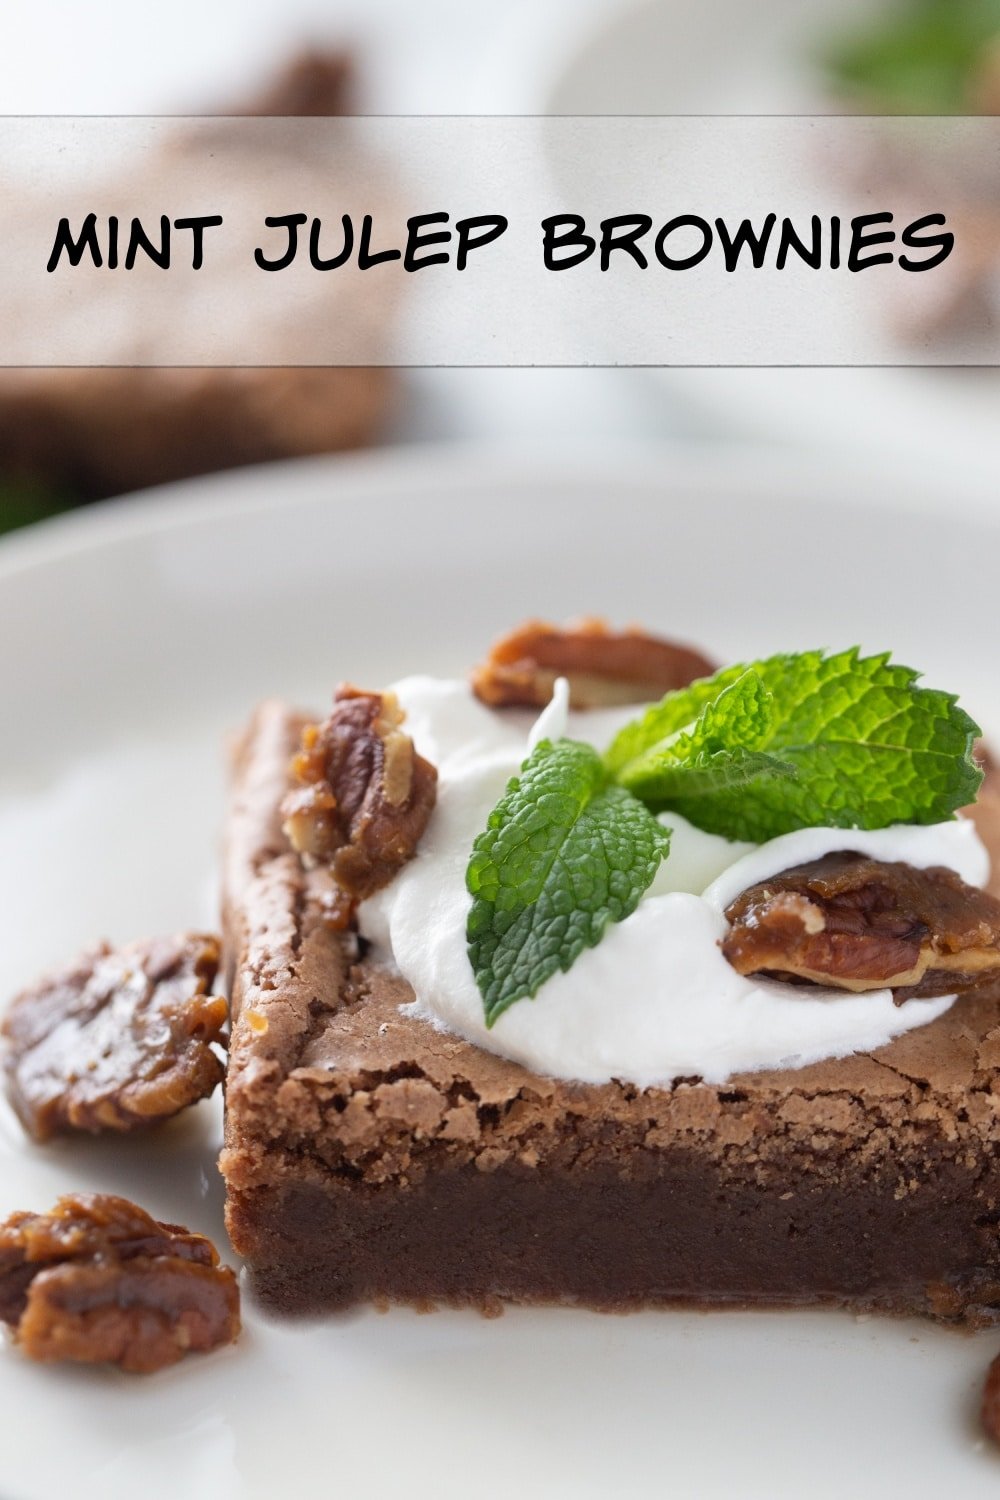 If you're a fan of Mint Julep cocktails, these decadent tasting Mint Julep Brownies, served over a splash of bourbon and with candies pecans were made for you! via @cmpollak1